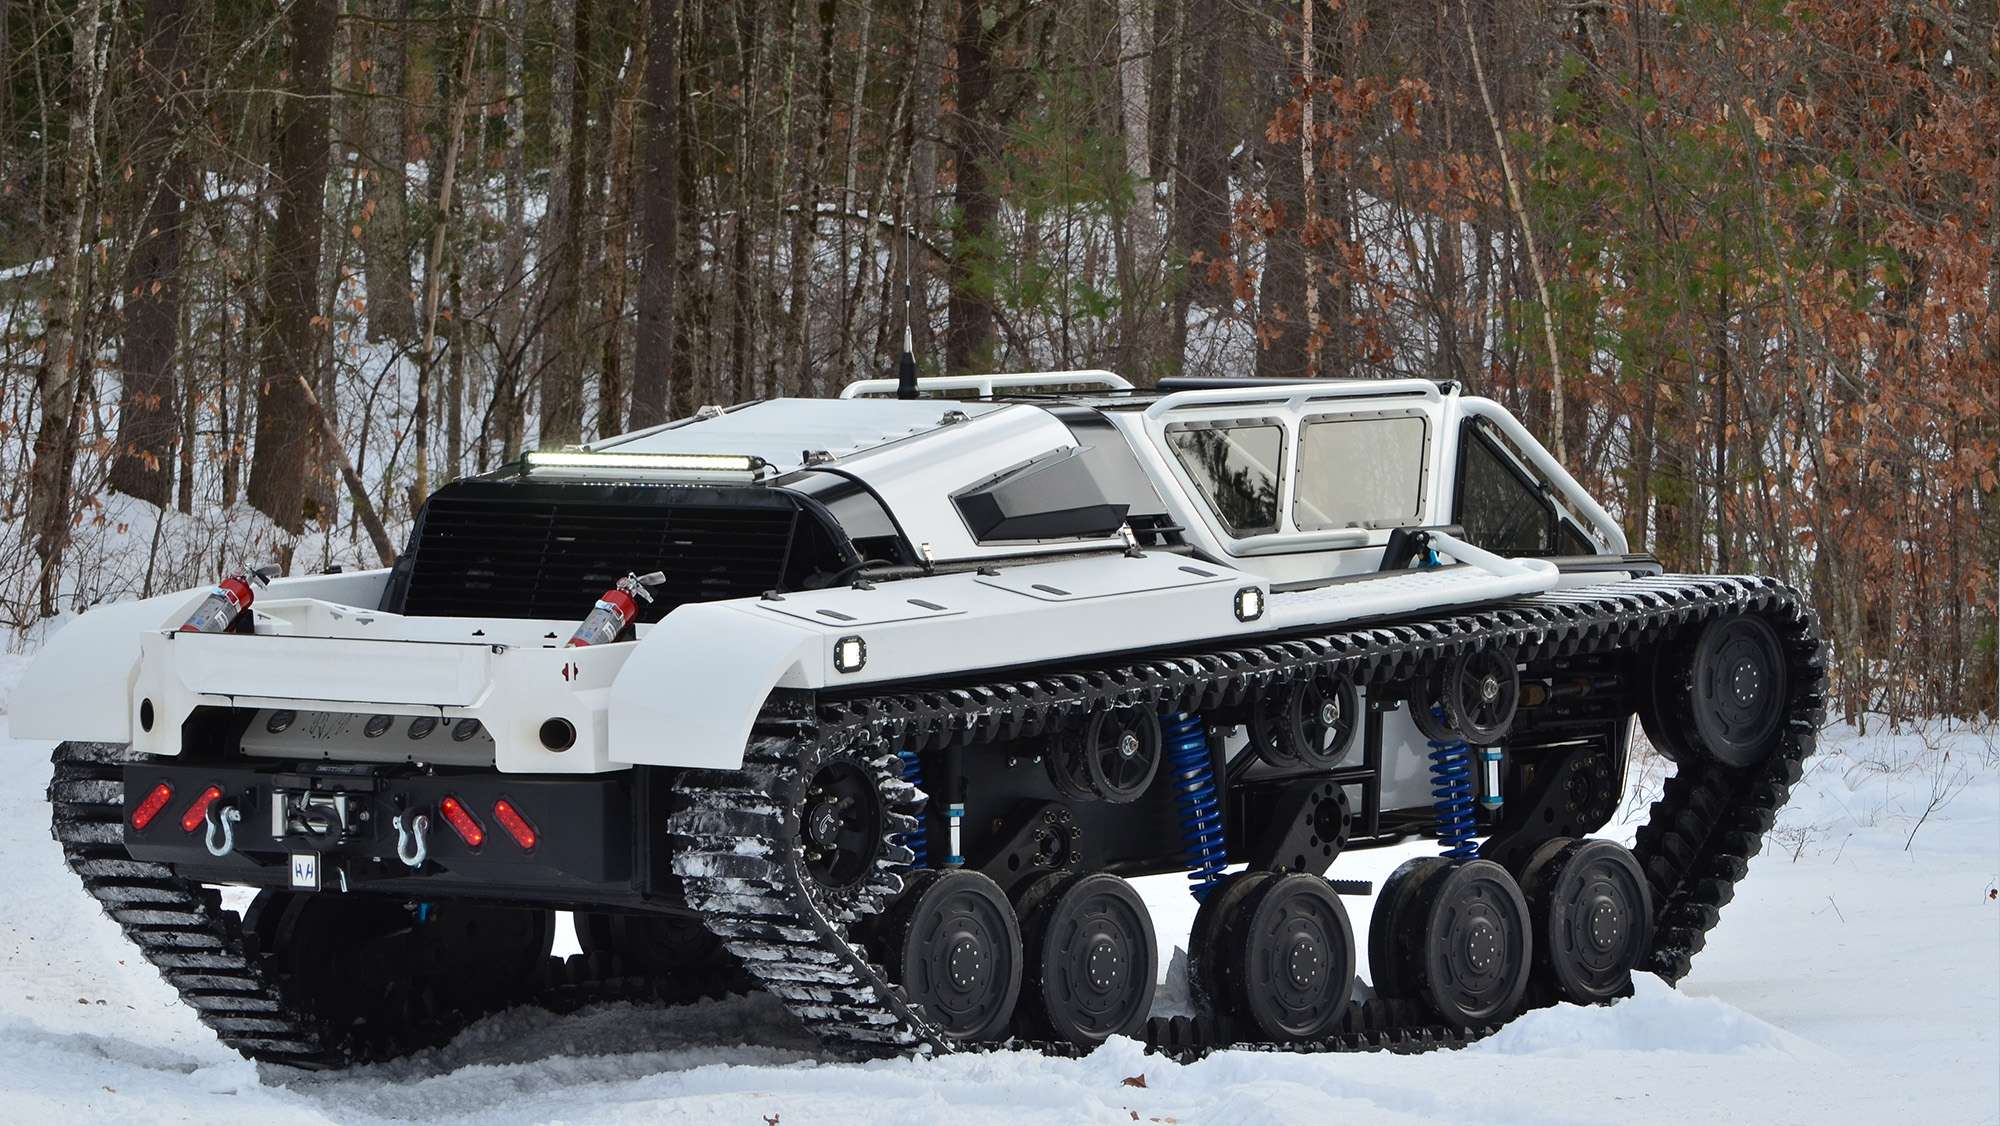 Behold the Ripsaw F4, the World’s Fastest DualTracked Vehicle You Can